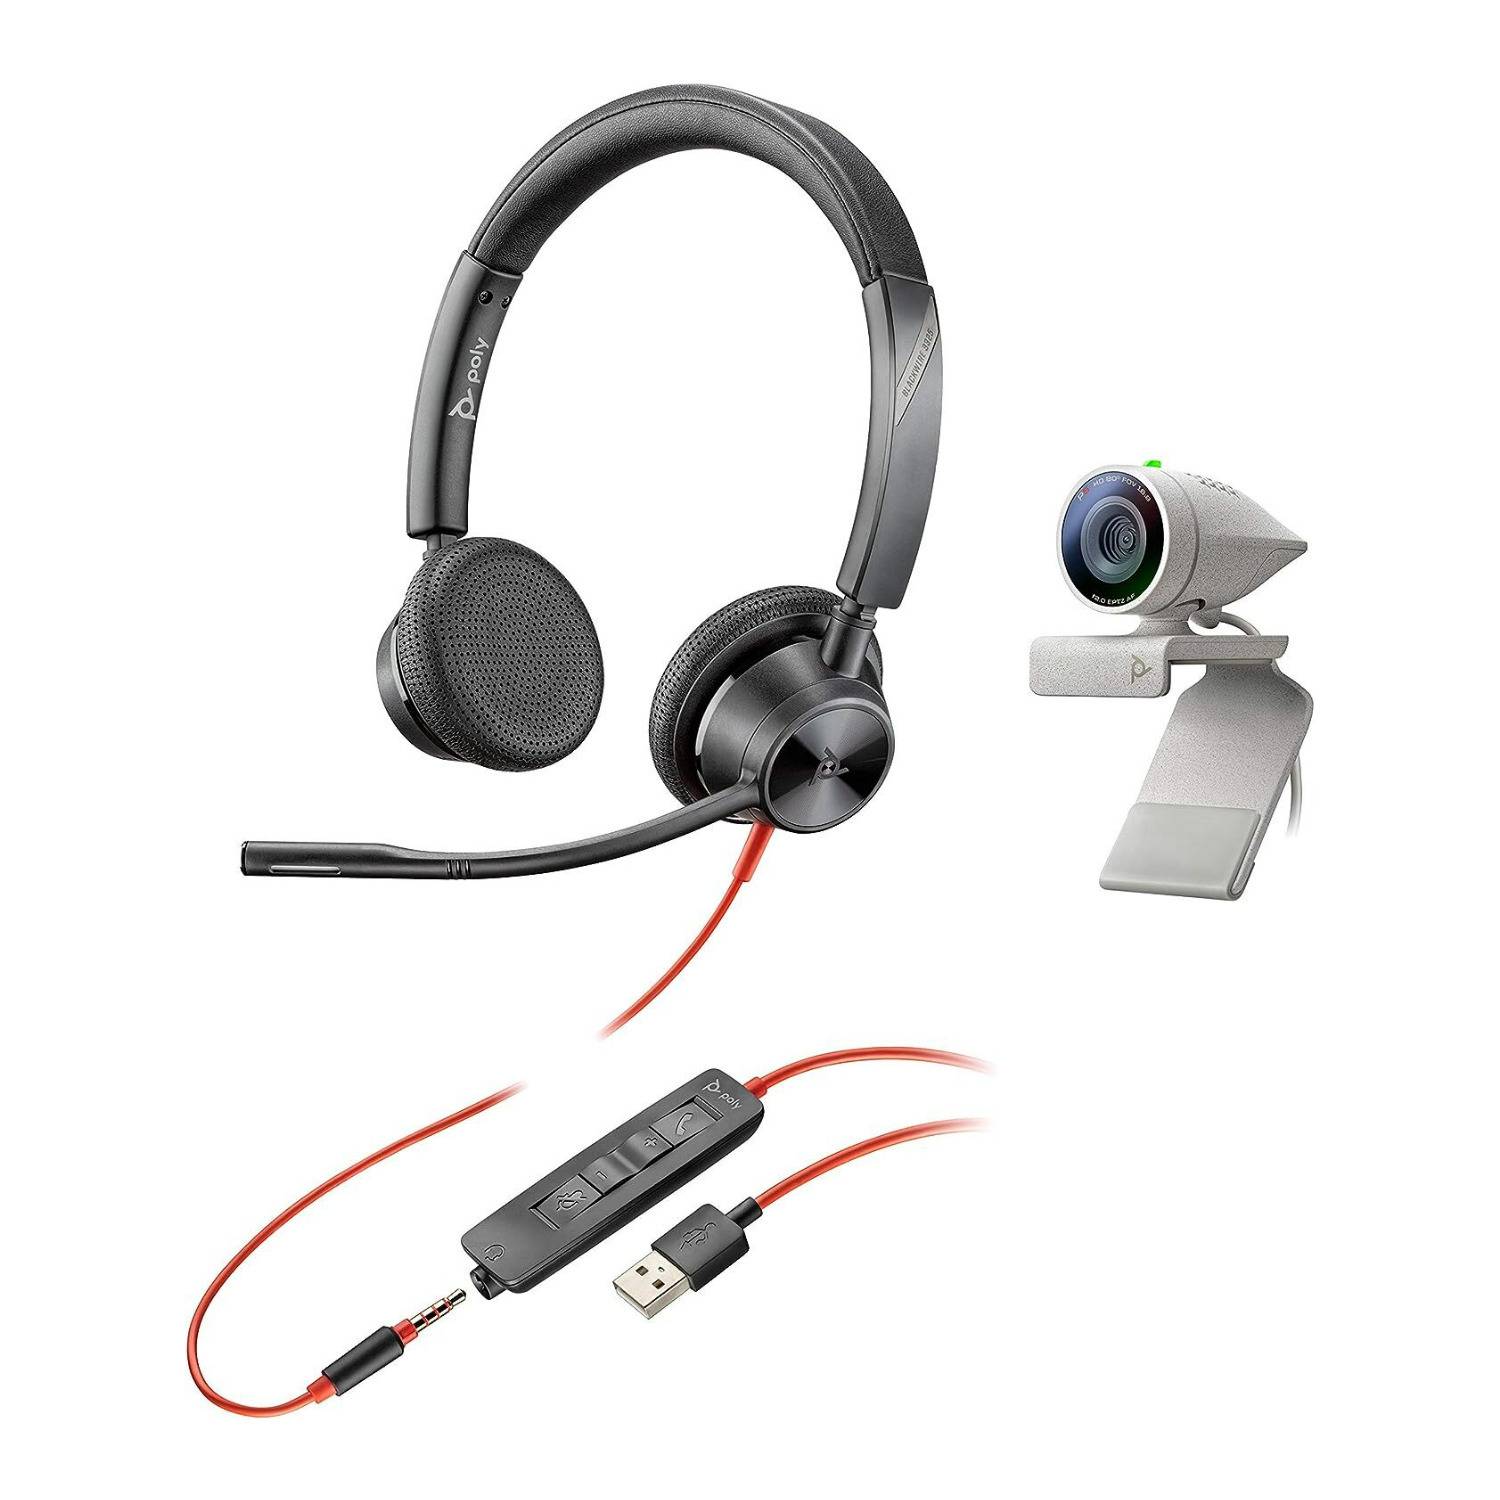 Poly Studio P5 Webcam and Blackwire 3325 Headset Kit with 4x Digital Zoom and Noise Canceling Mic